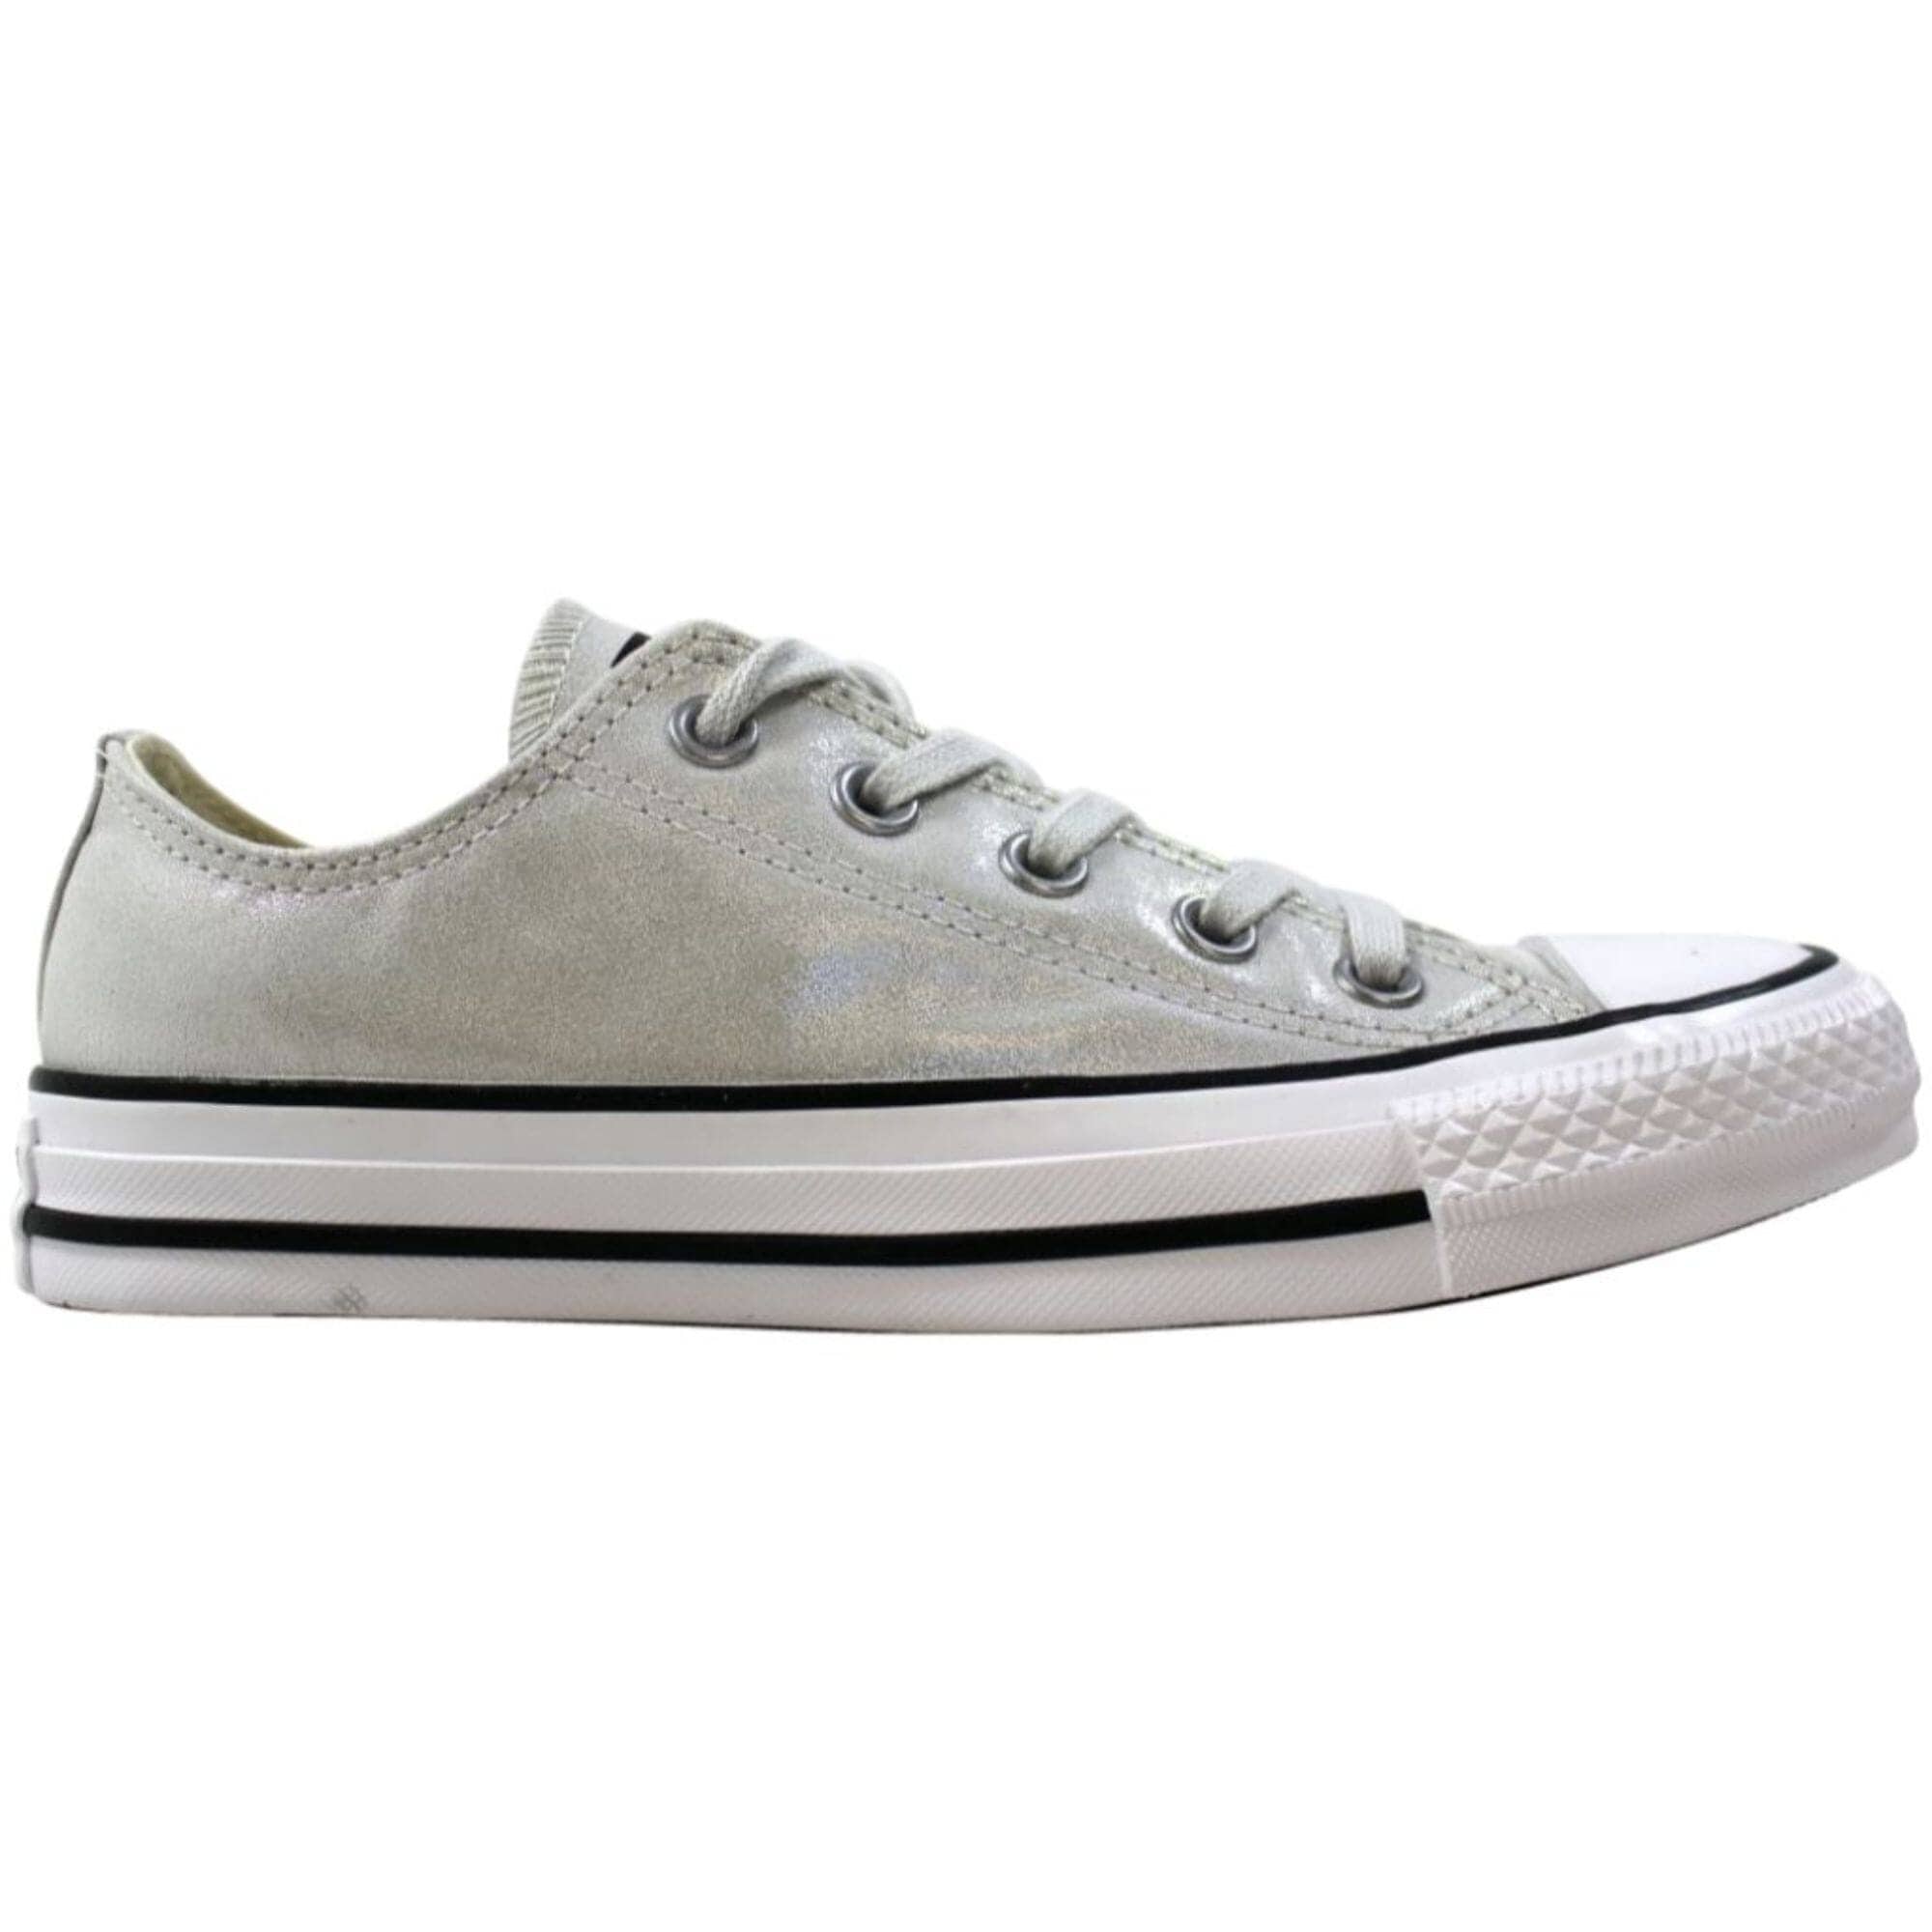 Converse Chuck Taylor All Star OX Mouse 